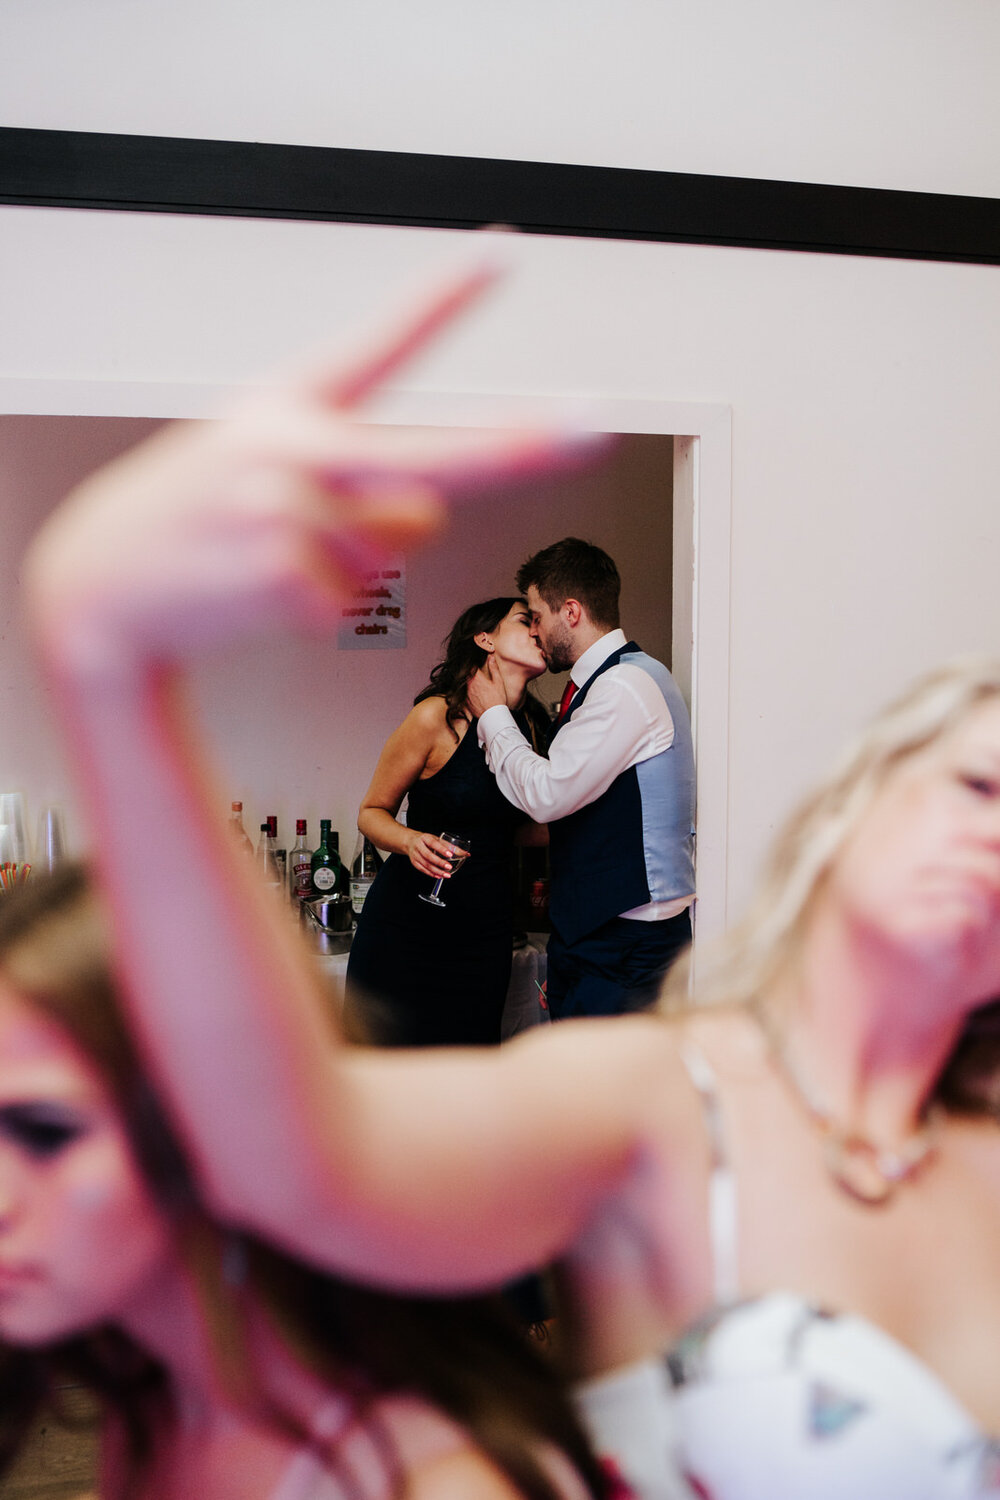 Guest motions towards camera as couple are seen kissing and embracing in the background